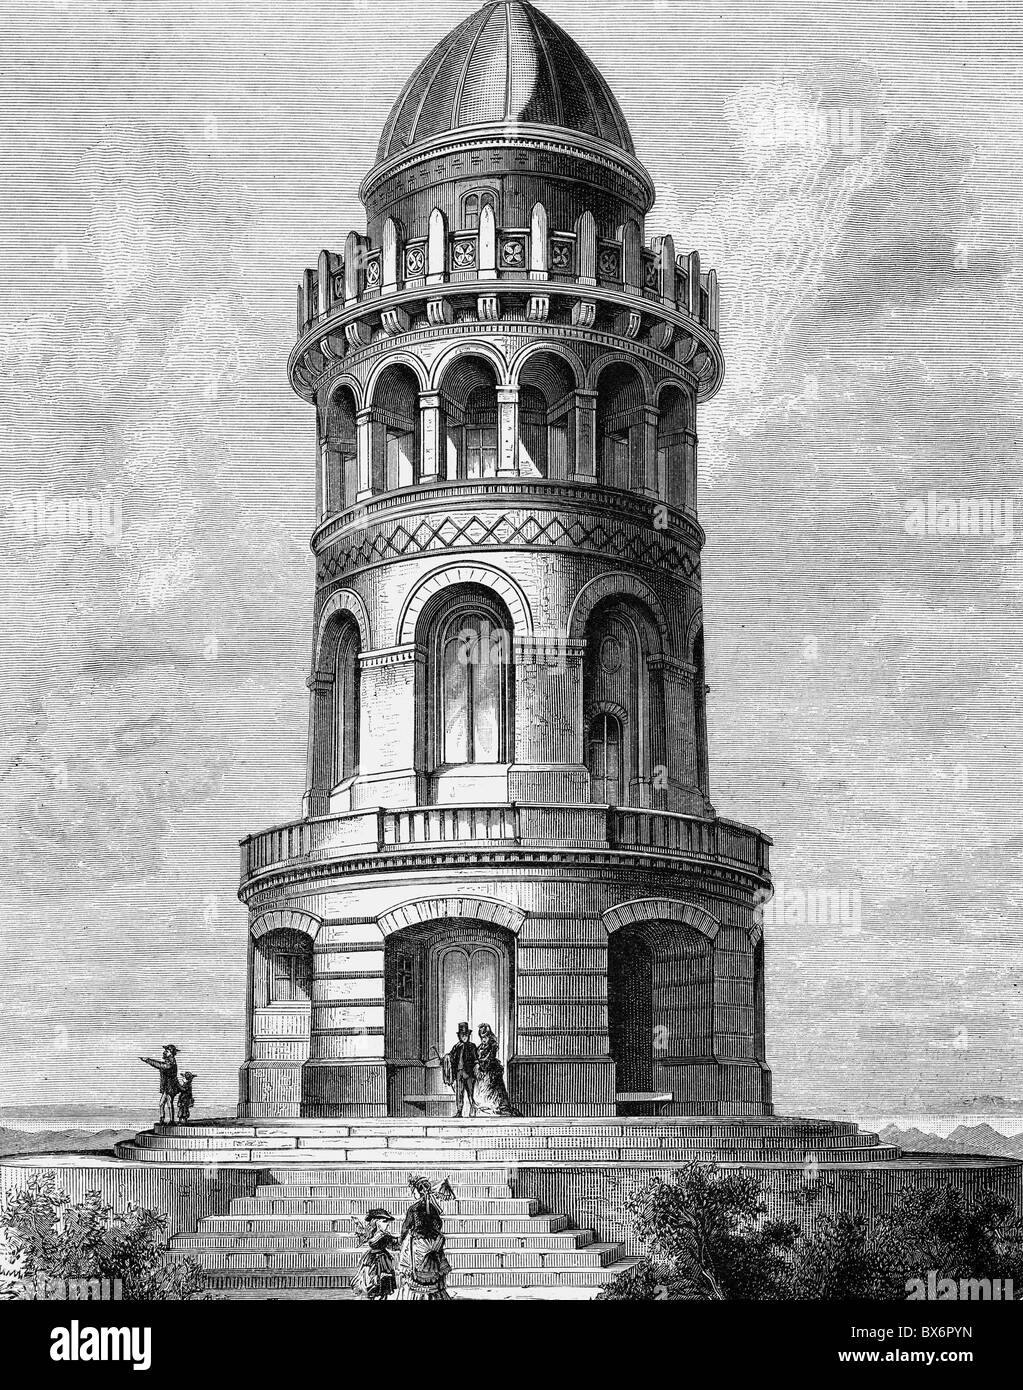 geography / travel, Germany, Ruegen Island, monuments, Ernst Moritz Arndt Tower, built 1872 - 1877 by Hermann Eggert, wood engraving, late 19th century, historic, historical, Europe, monument, Mecklenburg-West Pomerania, Mecklenburg, Pomerania, Rugen, Rügen, people, Additional-Rights-Clearences-Not Available Stock Photo